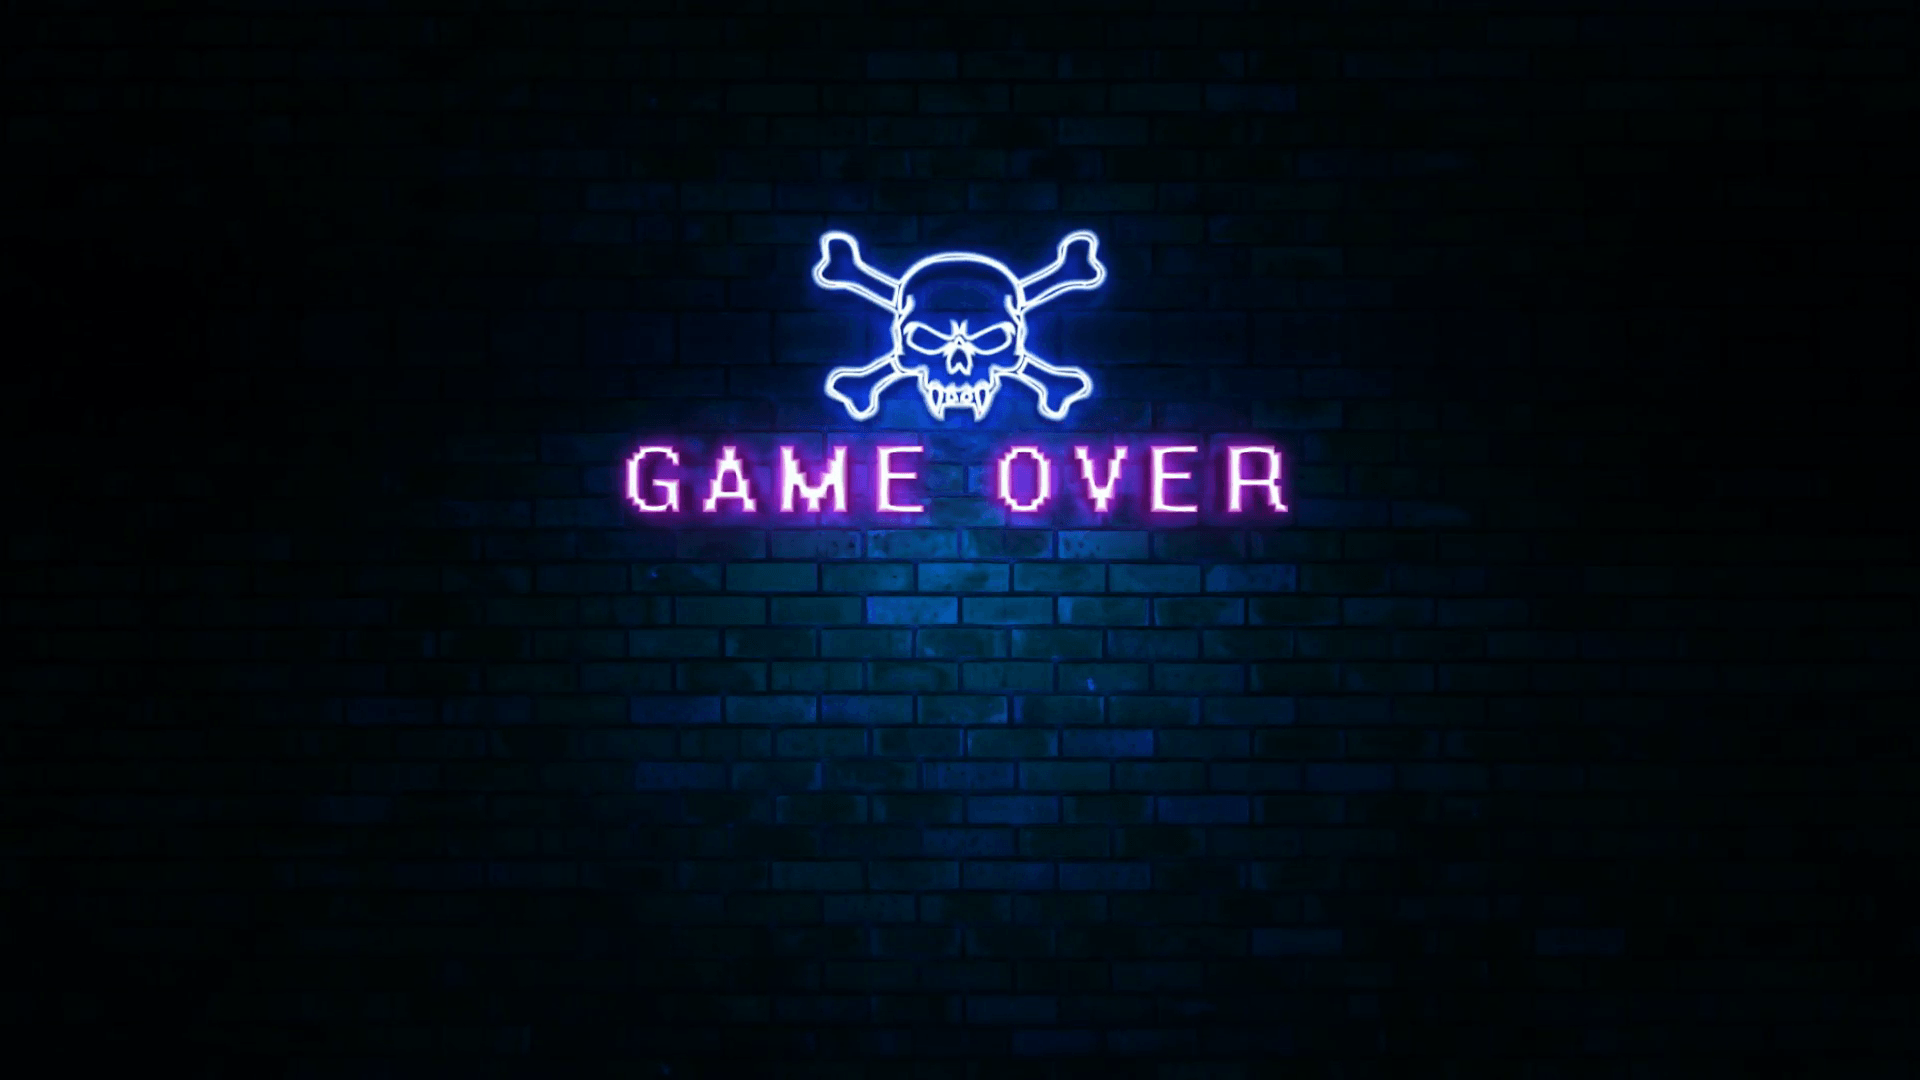 Neon Sign Wallpaper Free Neon Sign Background